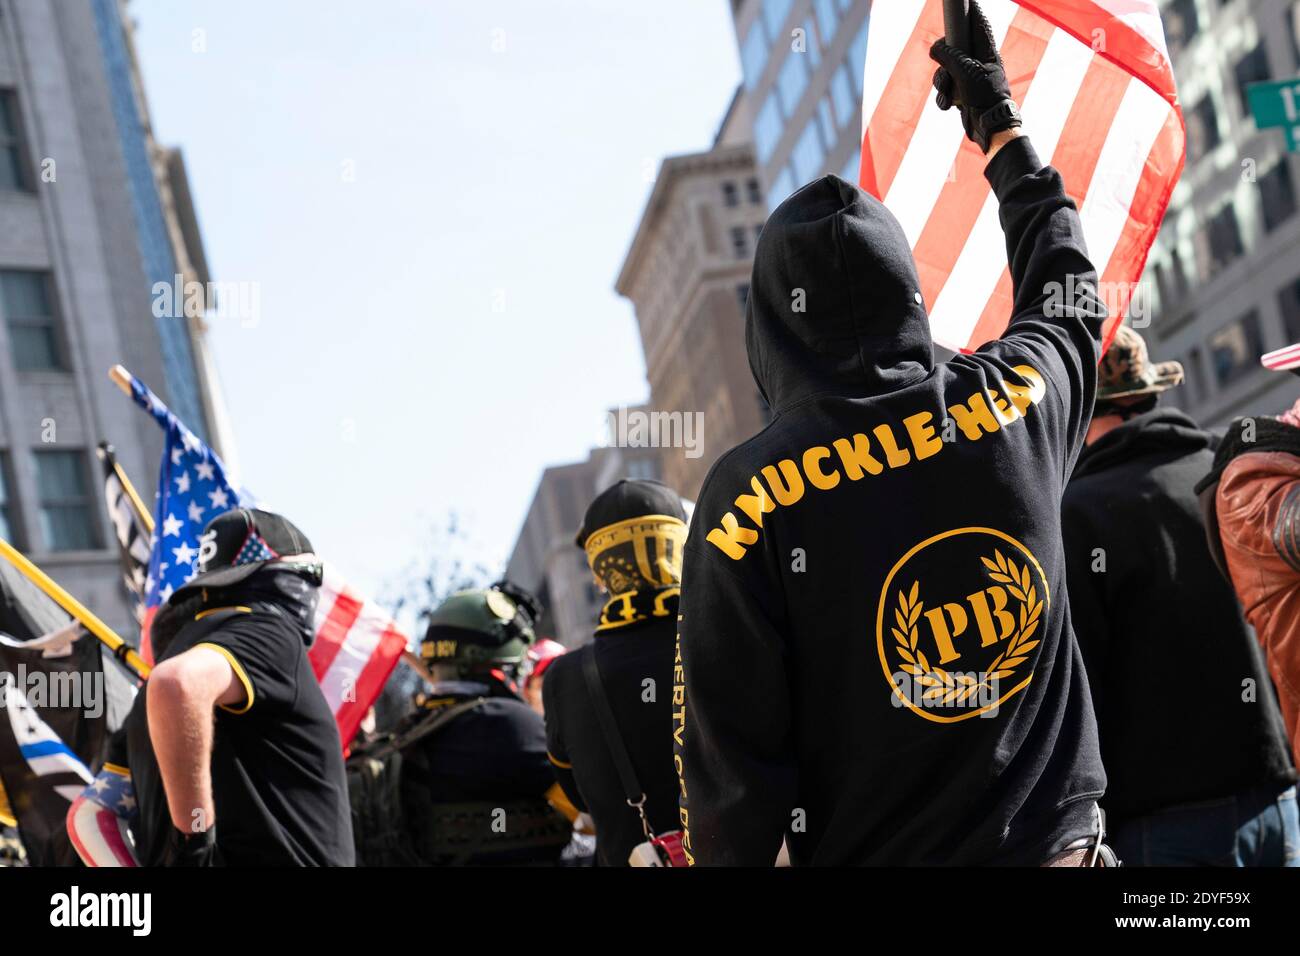 A member of the Proud Boys is seen at a gathering during the 'Million MAGA March' at Freedom Plaza in Washington, D.C., U.S., on Saturday, Nov. 14, 2020. The rally comes one week after news organizations projected Joe Biden as the winner of the 2020 election and President Trumps refusal to acknowledge he lost. Credit: Alex Edelman/The Photo Access Stock Photo